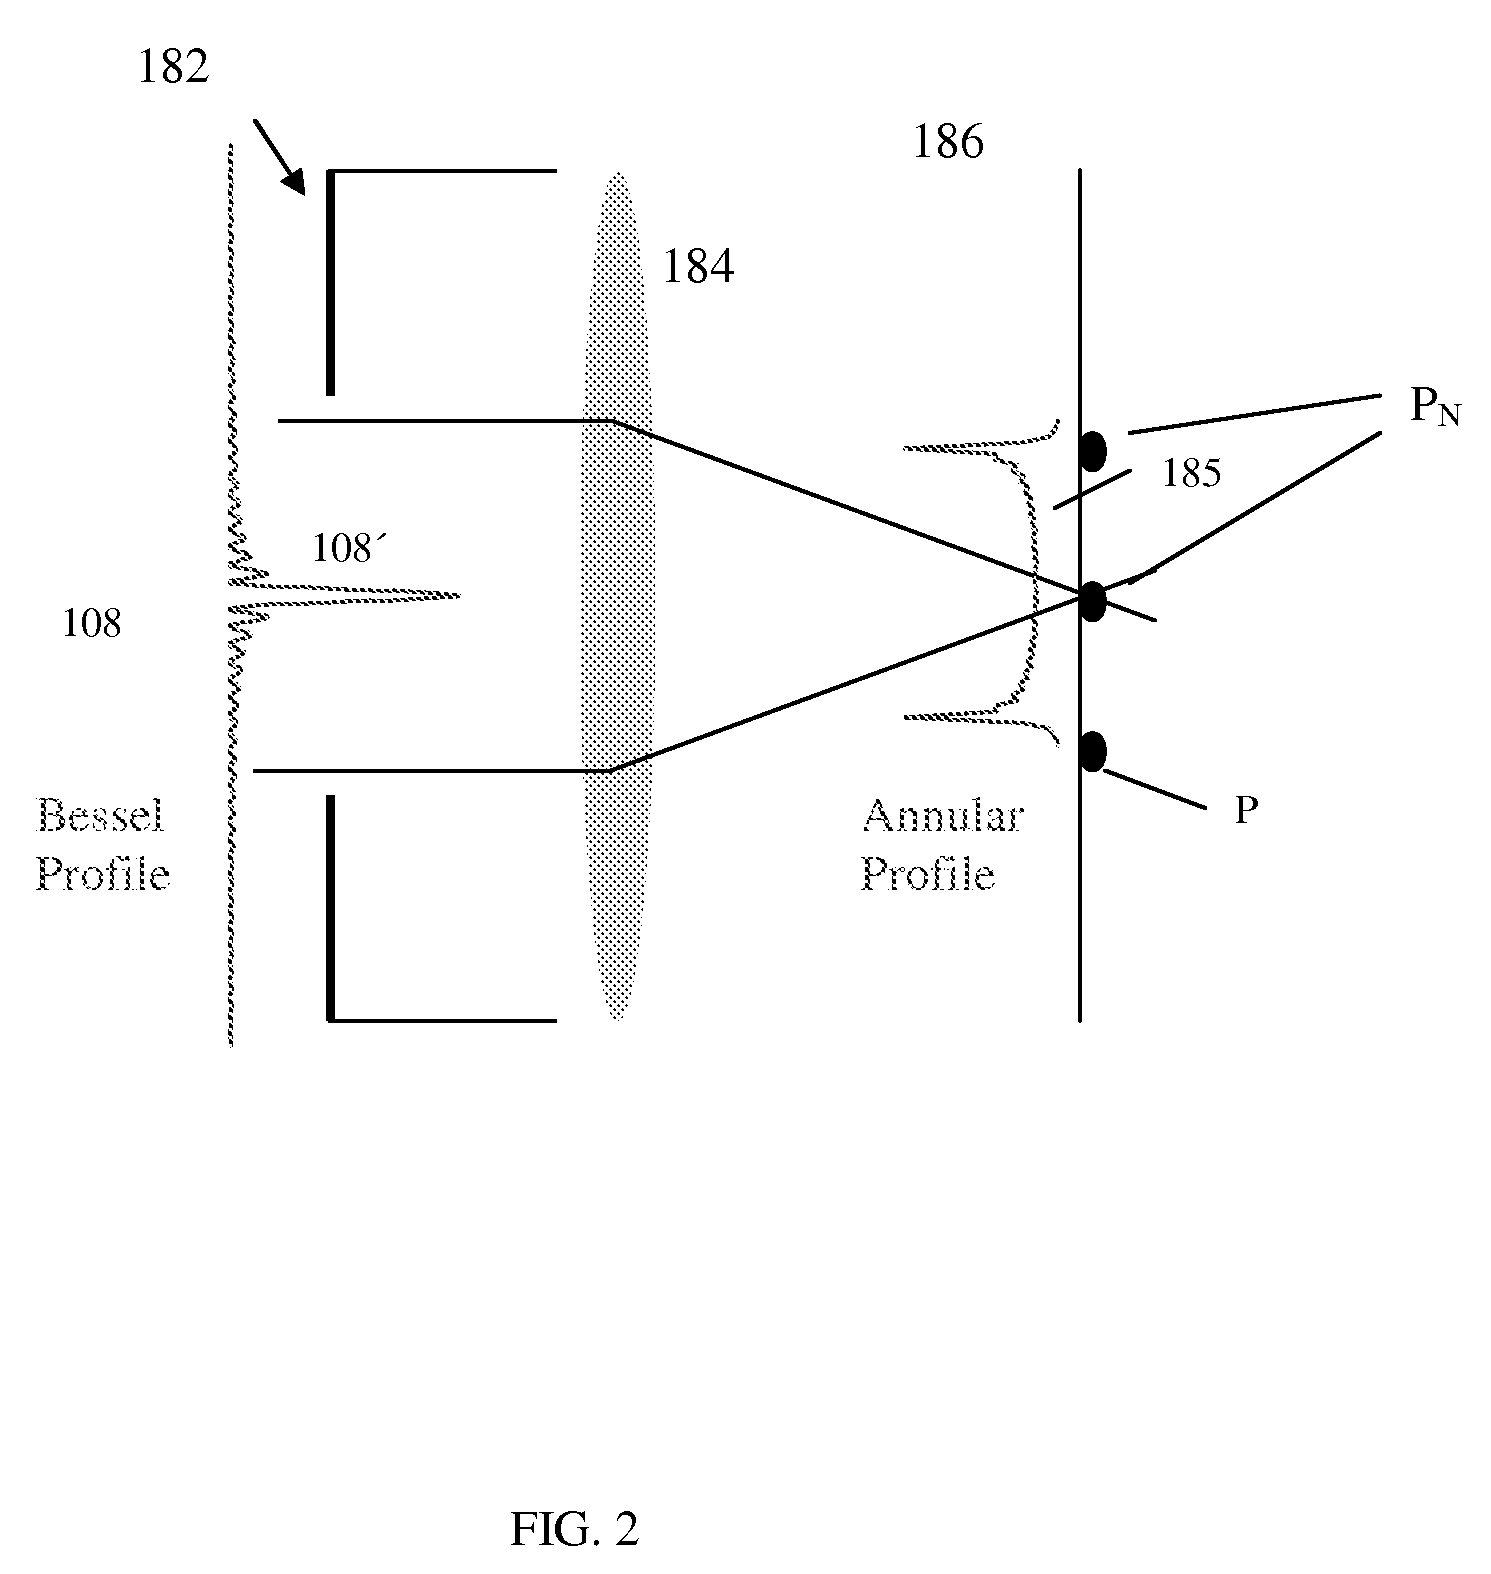 Free-Space Communications System and Method